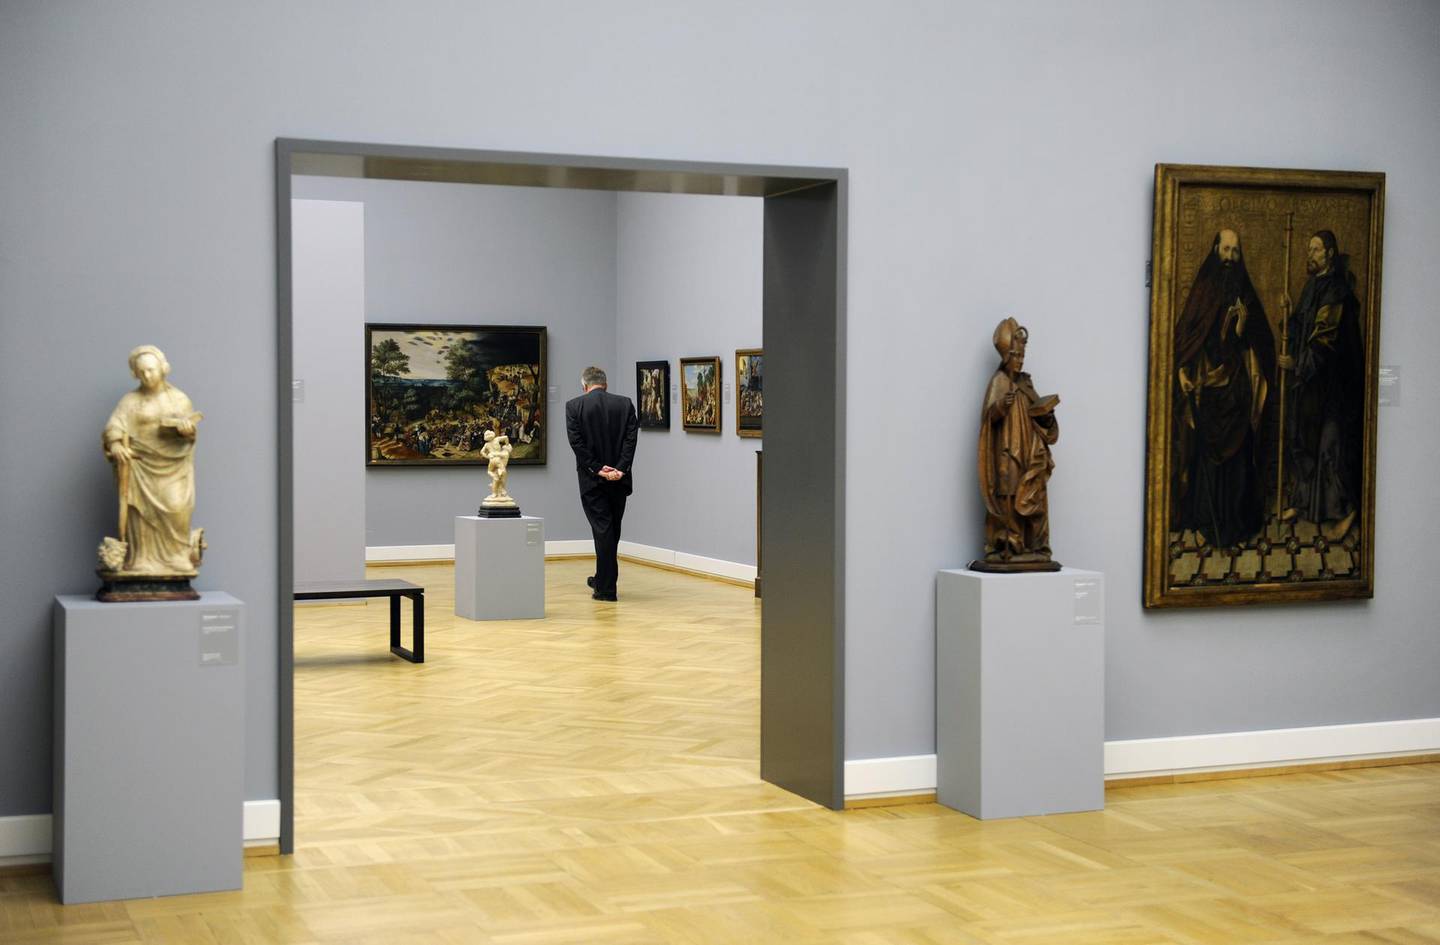 Denmark. Copenhagen. National Museum of Art. Interior. (Photo by: Prisma/Universal Images Group via Getty Images)